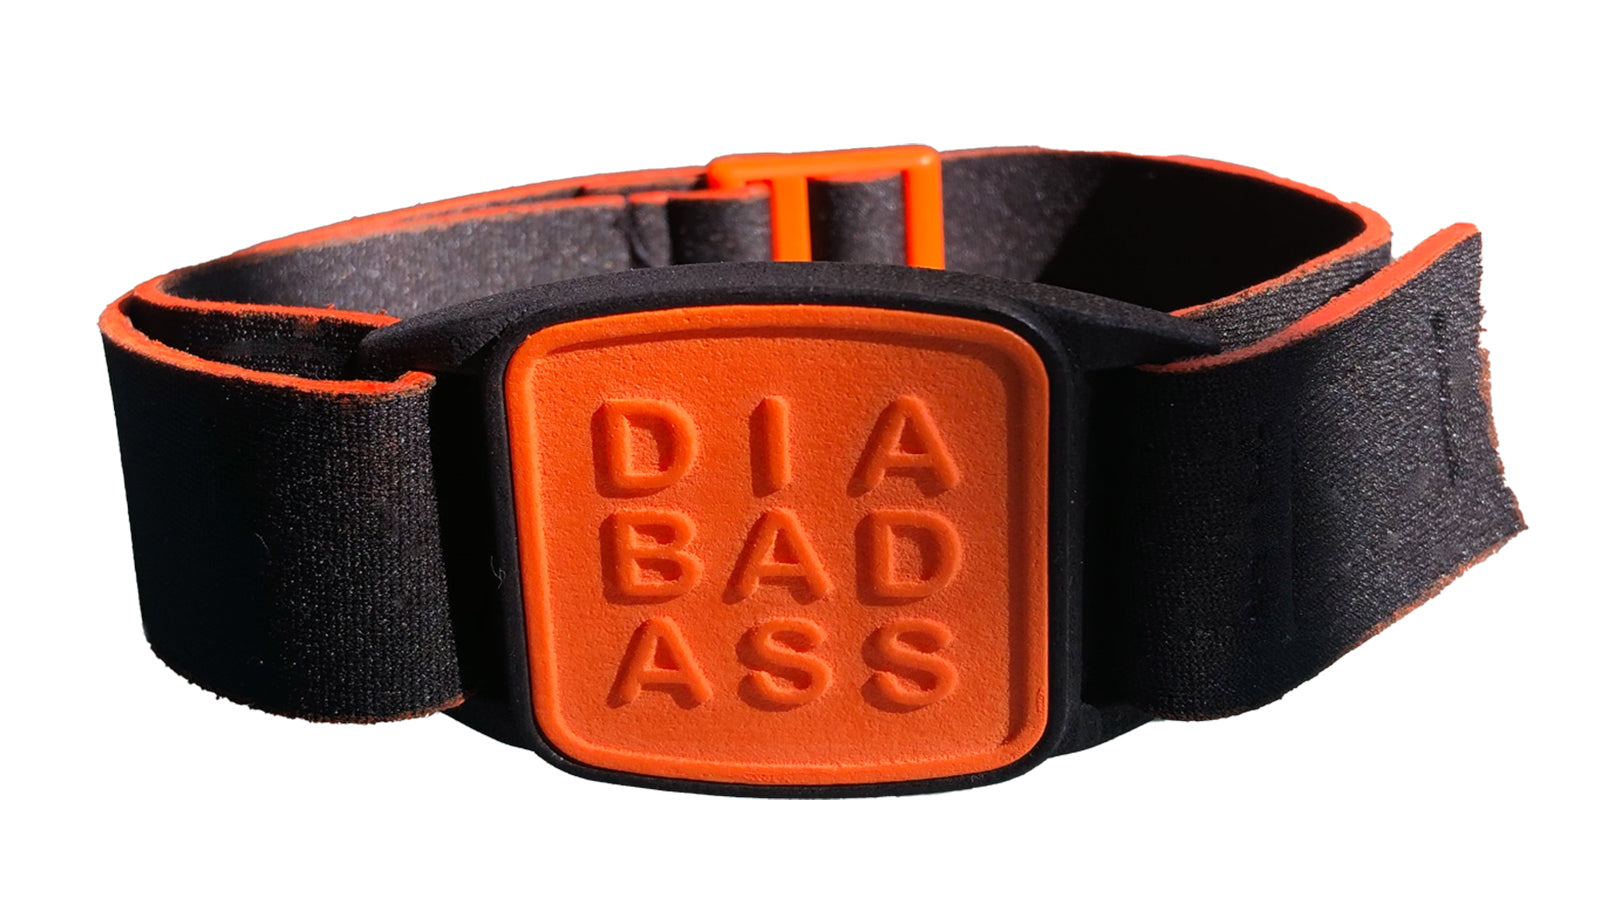 Dexband armband in orange with DIABADASS cover.